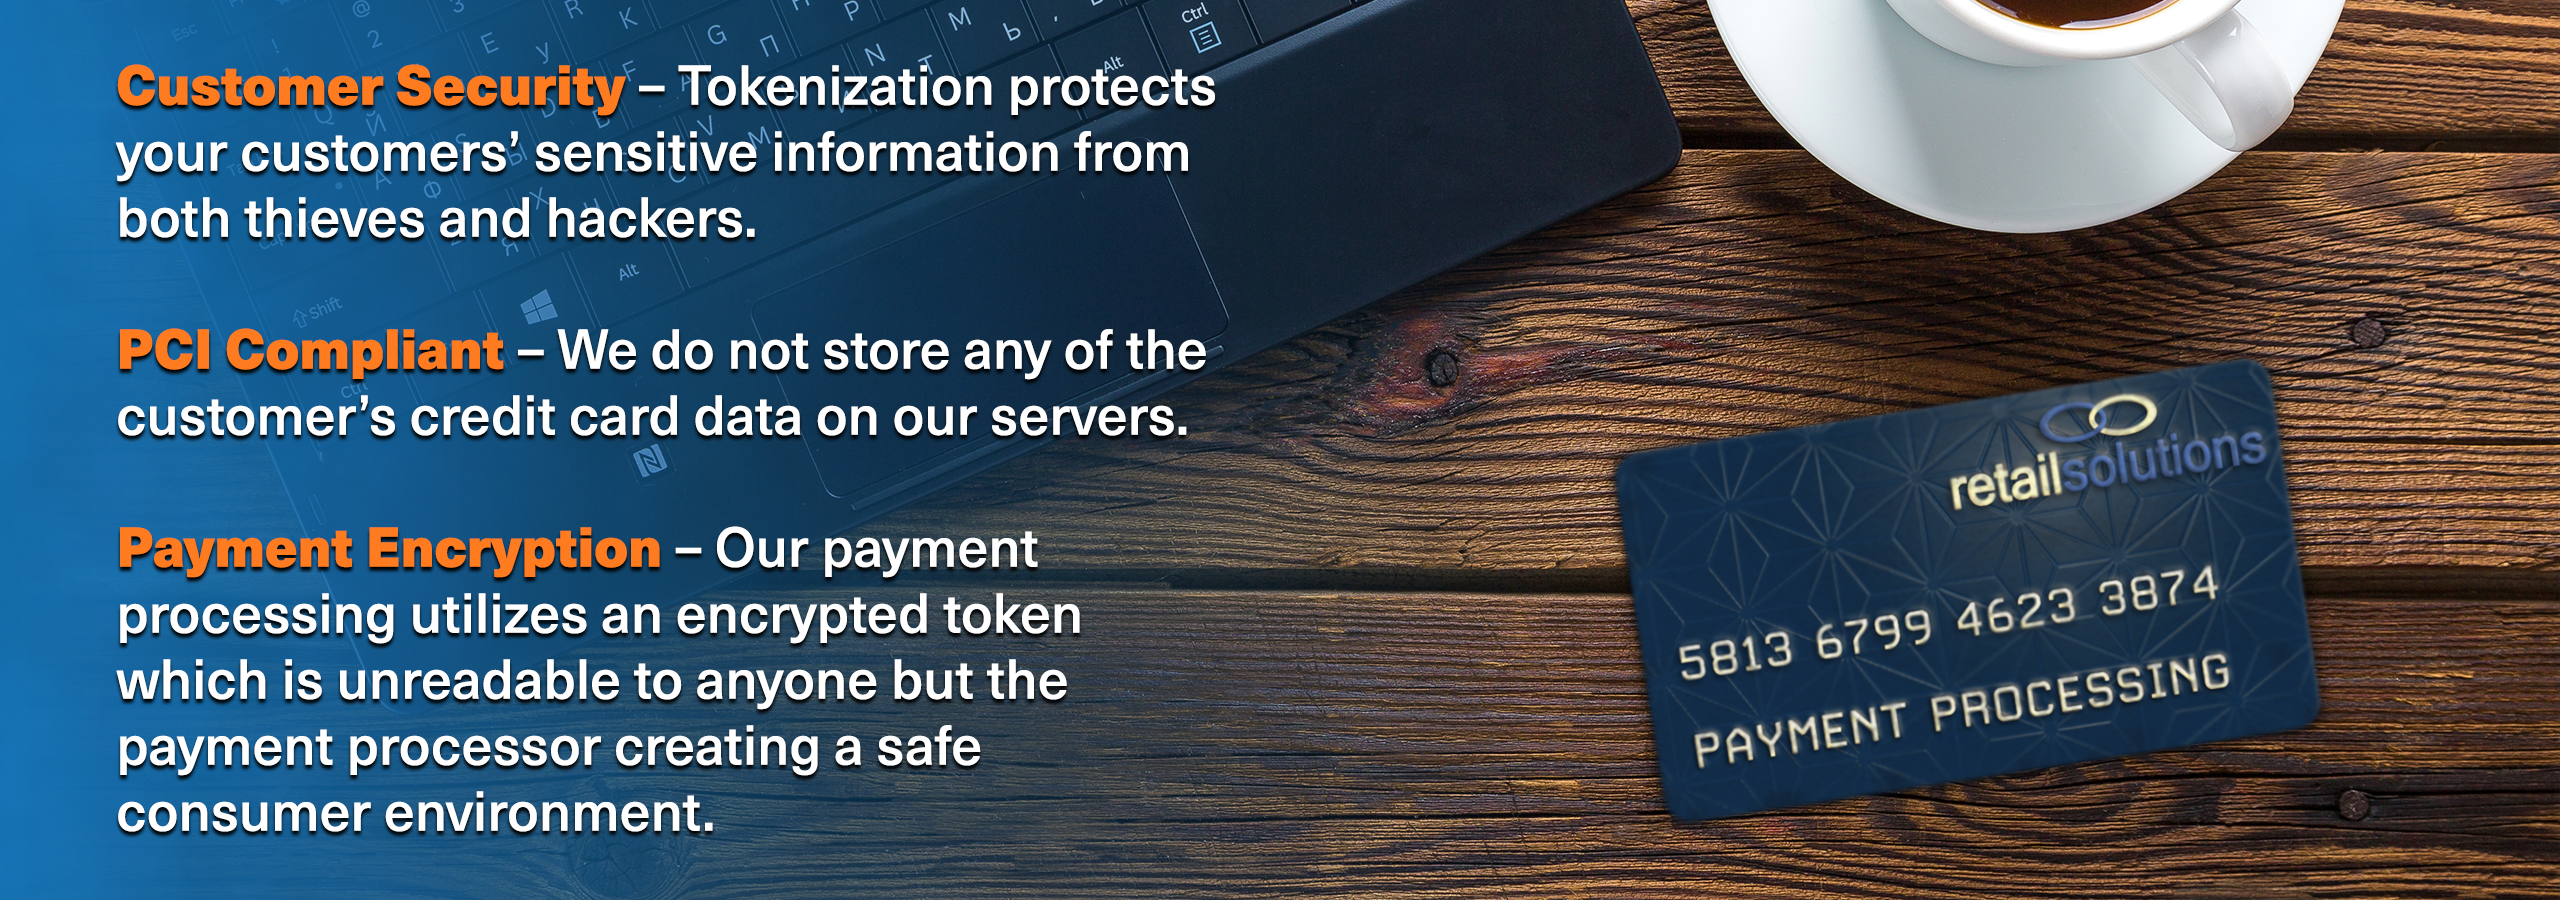 Our payment processing systems ensure that online purchasing is reliable and that customer data is absolutely protected.